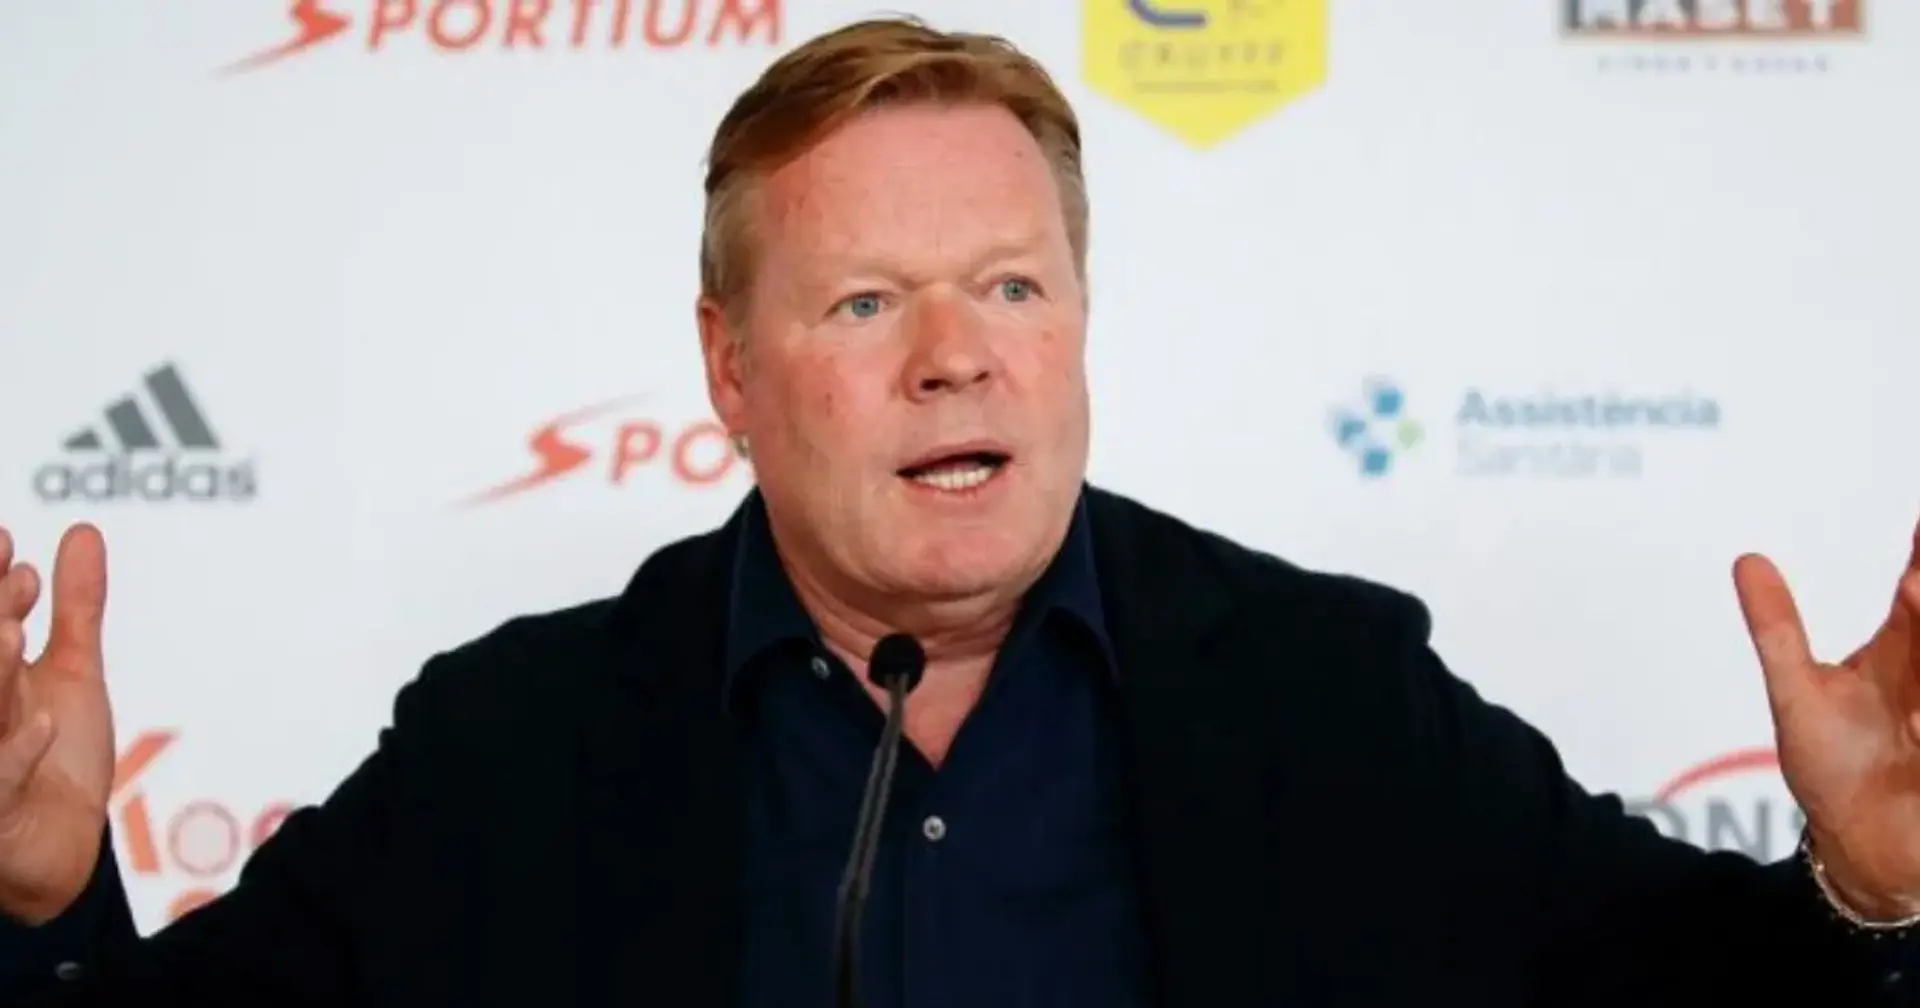 Koeman: 'People who know the situation think I did a good job at Barca'